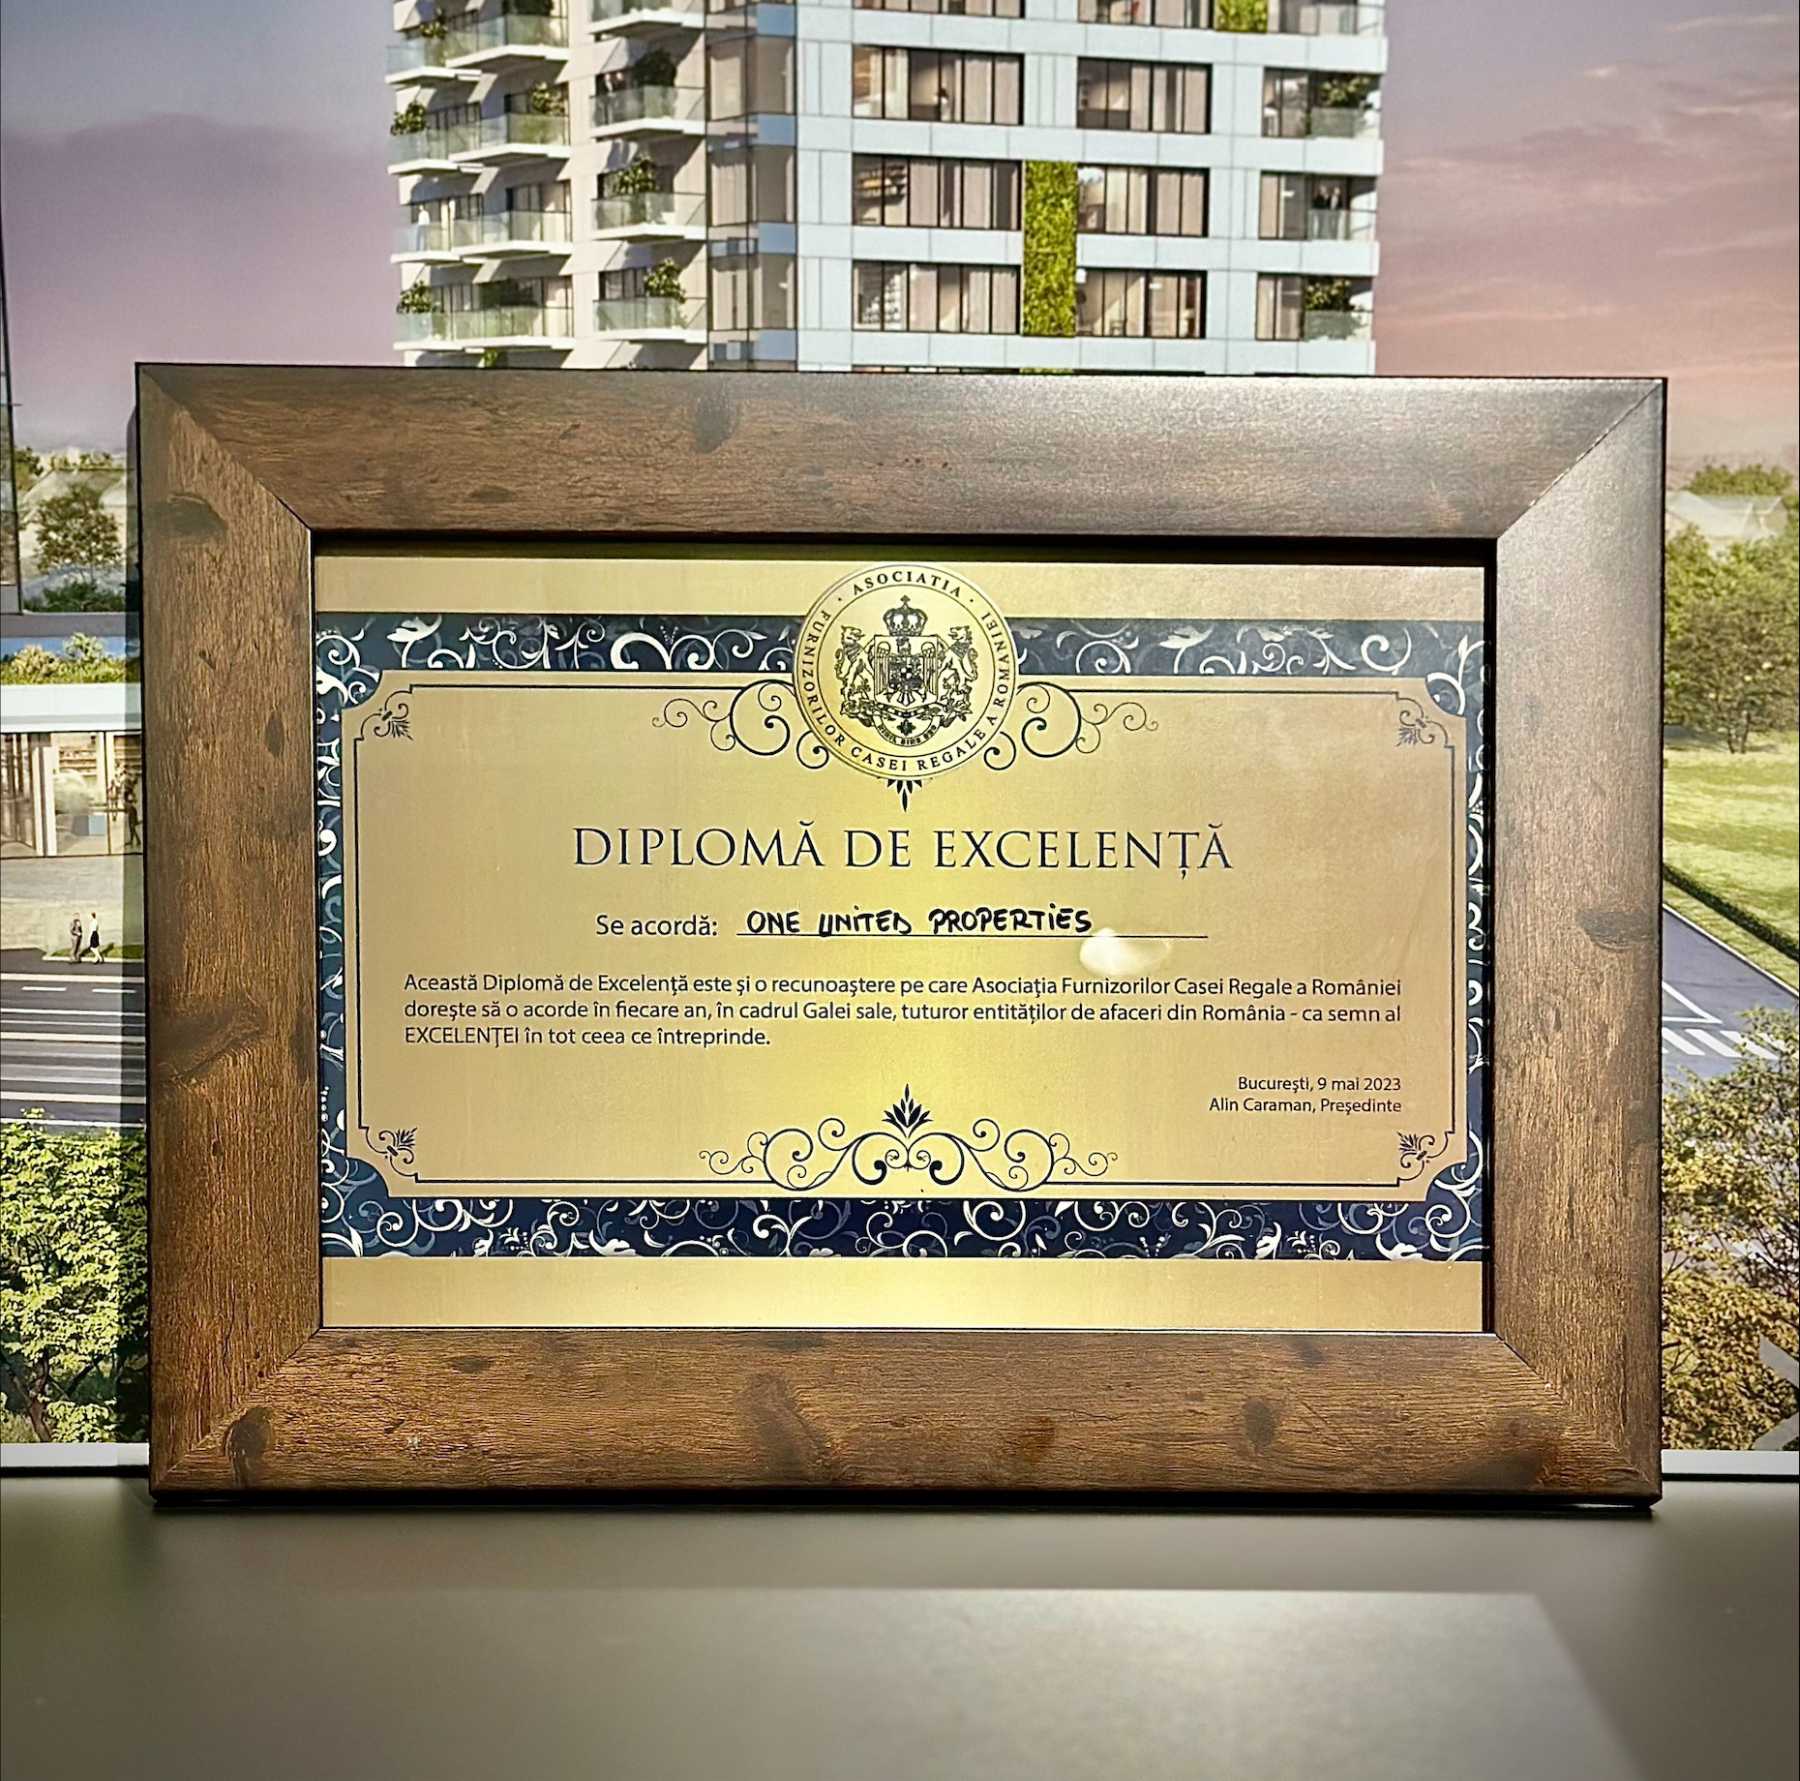 One United Properties received the diploma of excellence from the Association of Suppliers of the Royal House of Romania